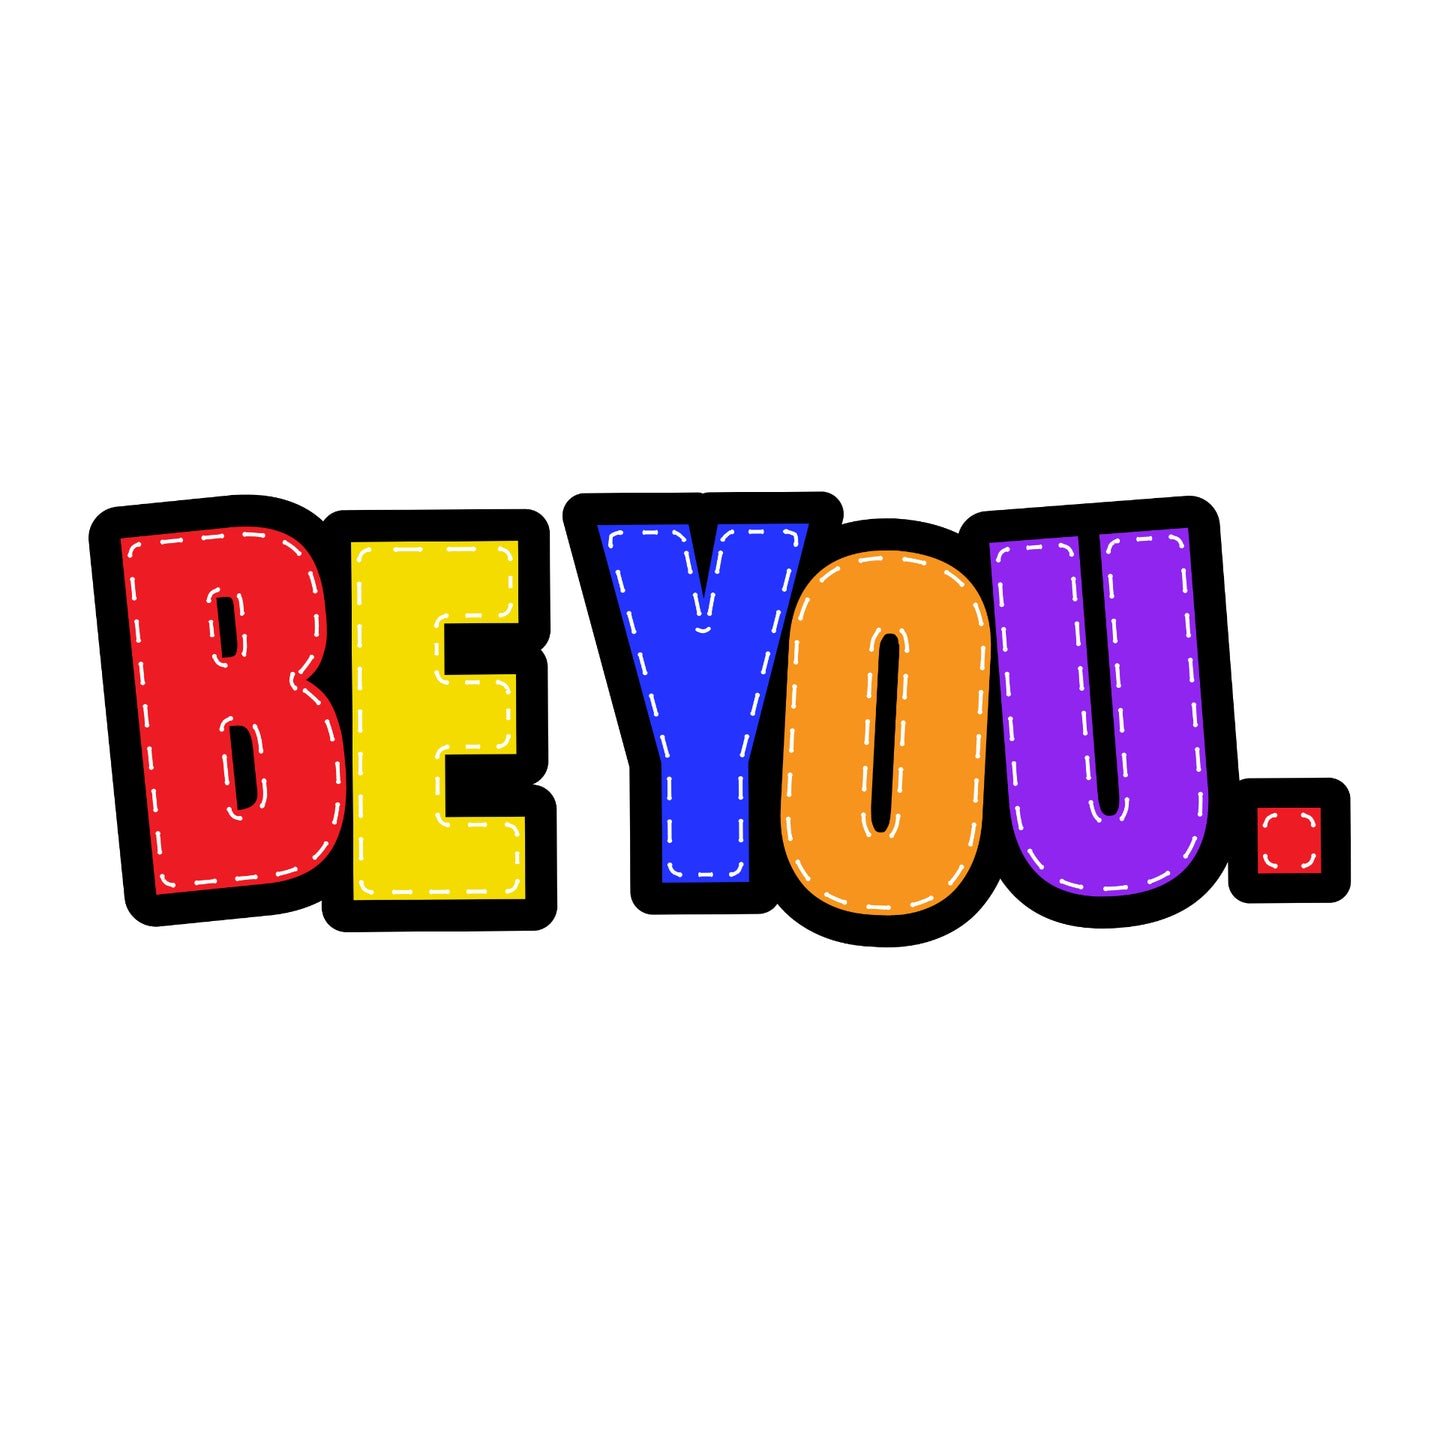 WHY BE ANYTHING ELSE WHEN YOU CAN BE YOU.  THE BE YOU. BRAND IS A LIFESTYLE BRAND ENCOURAGING PEOPLE TO BE THEMSELVES. Promoting high self -esteem, self-love, confidence, originality, and individuality.